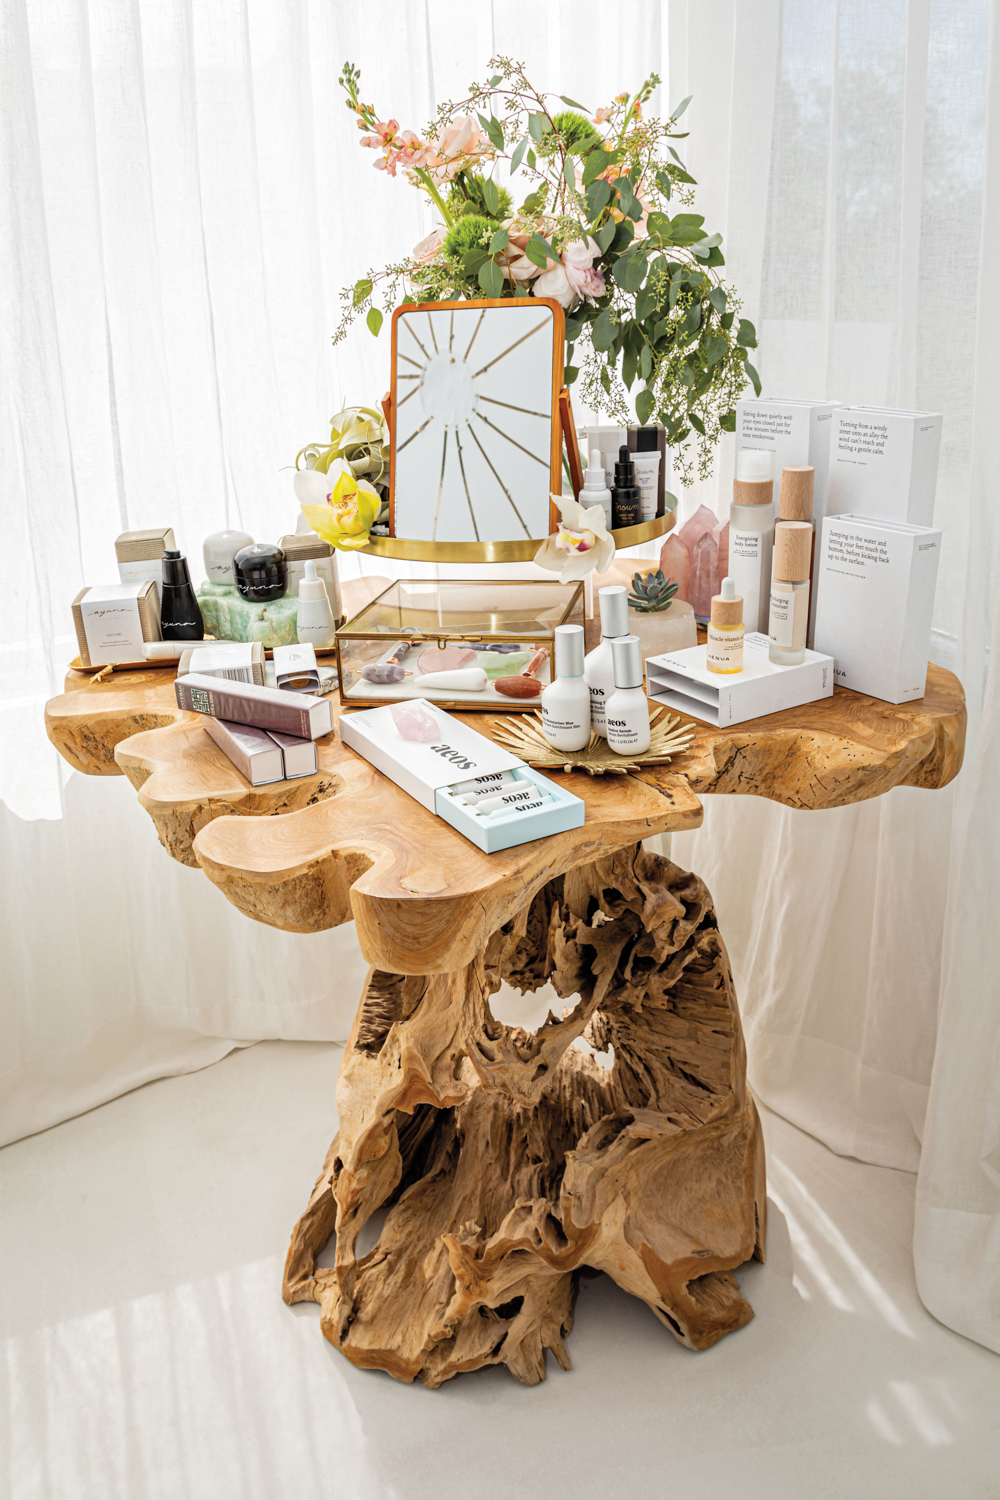 Driftwood-base table holding an array of crystals and wellness products